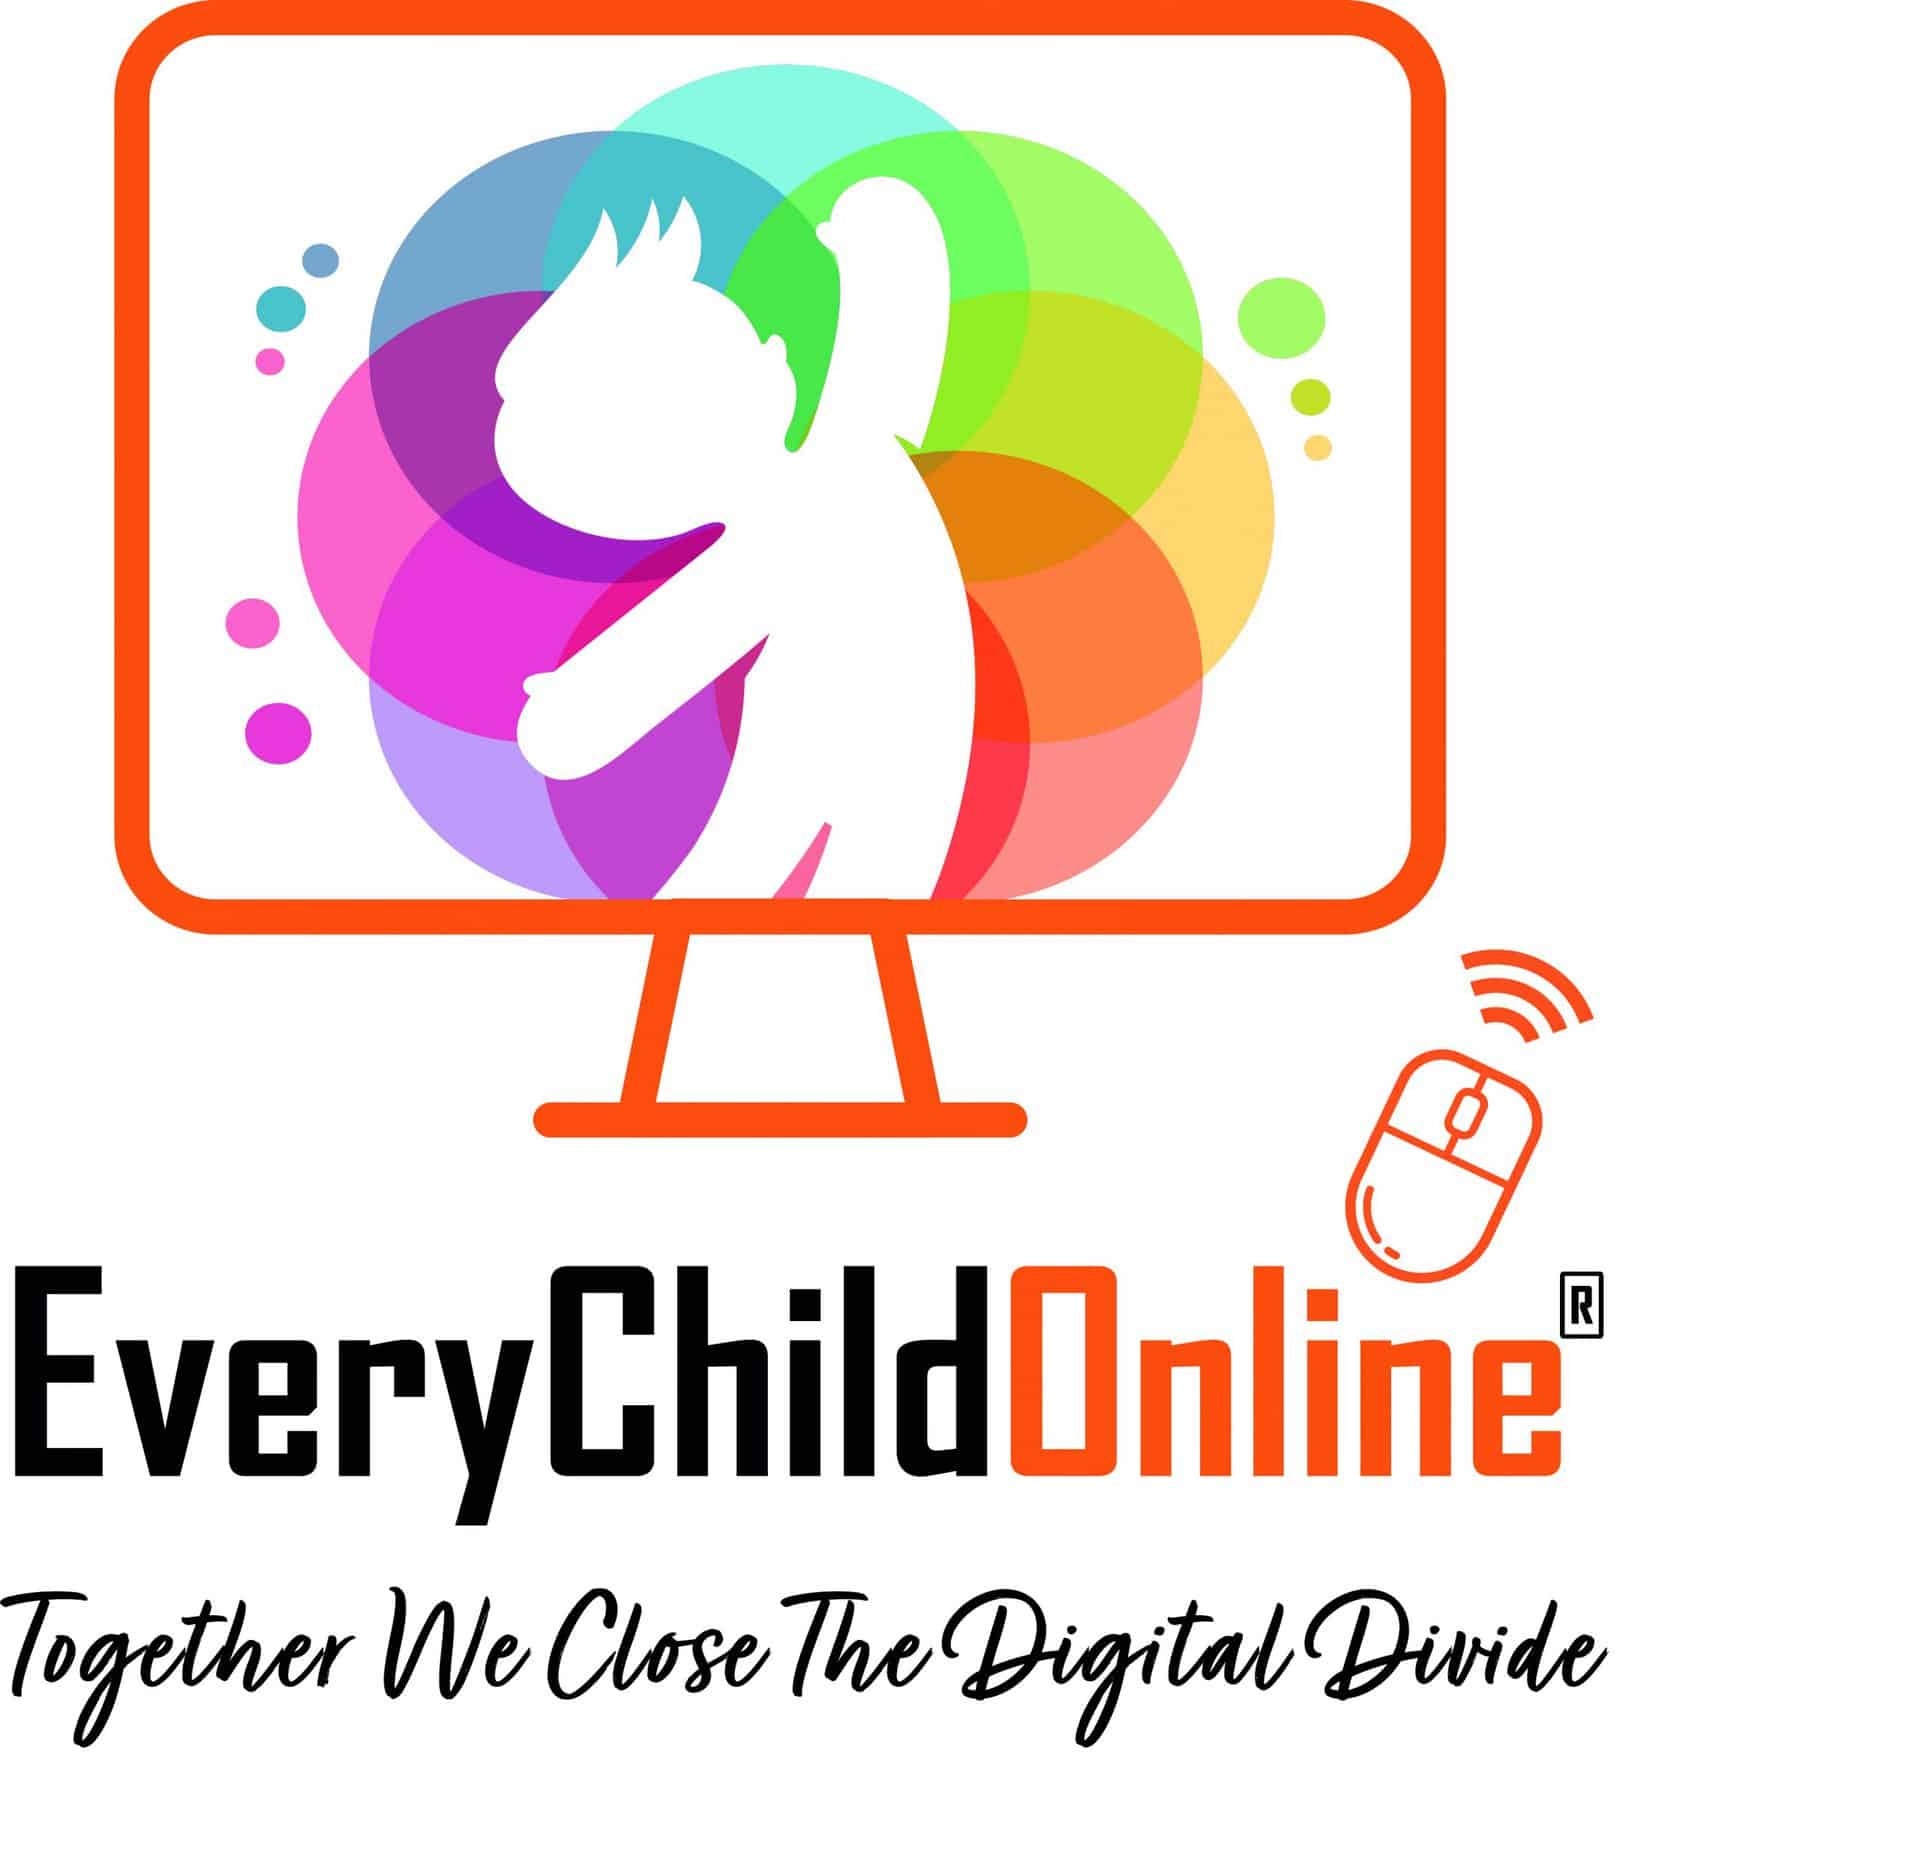 Charity Every Child Online partners with NSPCC’s Childline to empower vulnerable children through technology